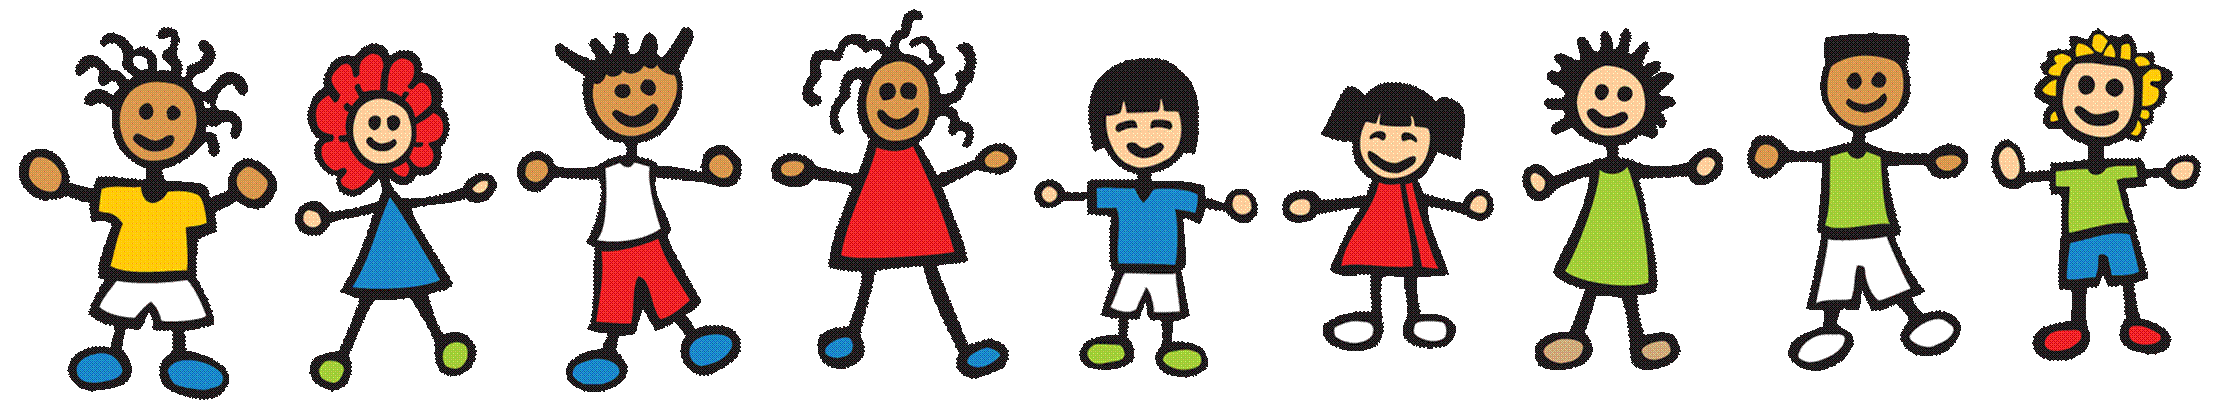 Happy Kids Clip Art Images  Pictures - Becuo